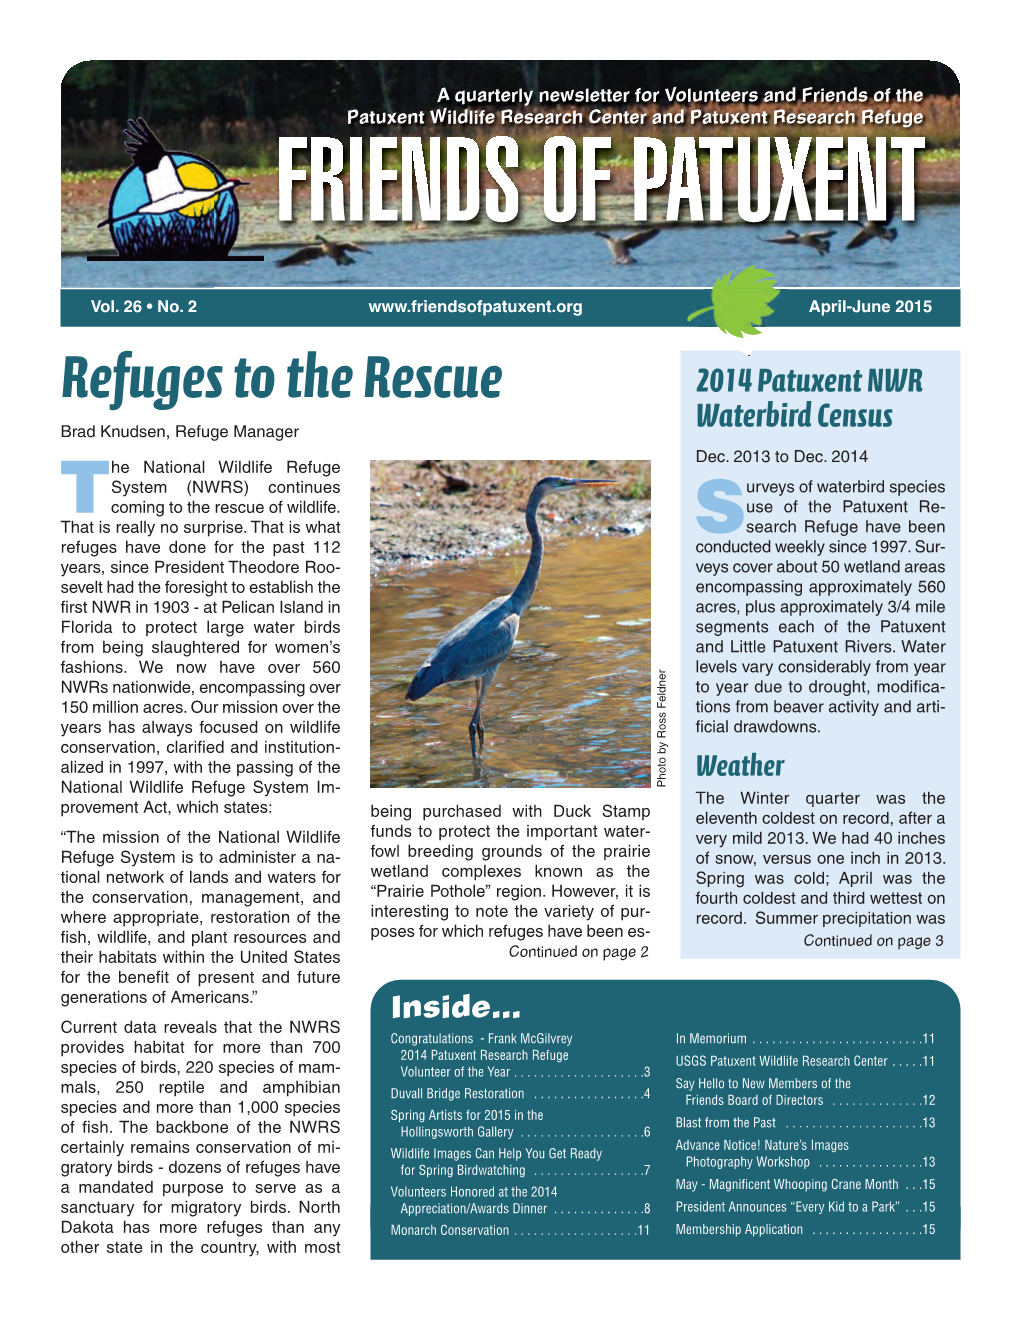 Refuges to the Rescue 2014 Patuxent NWR Brad Knudsen, Refuge Manager Waterbird Census Dec